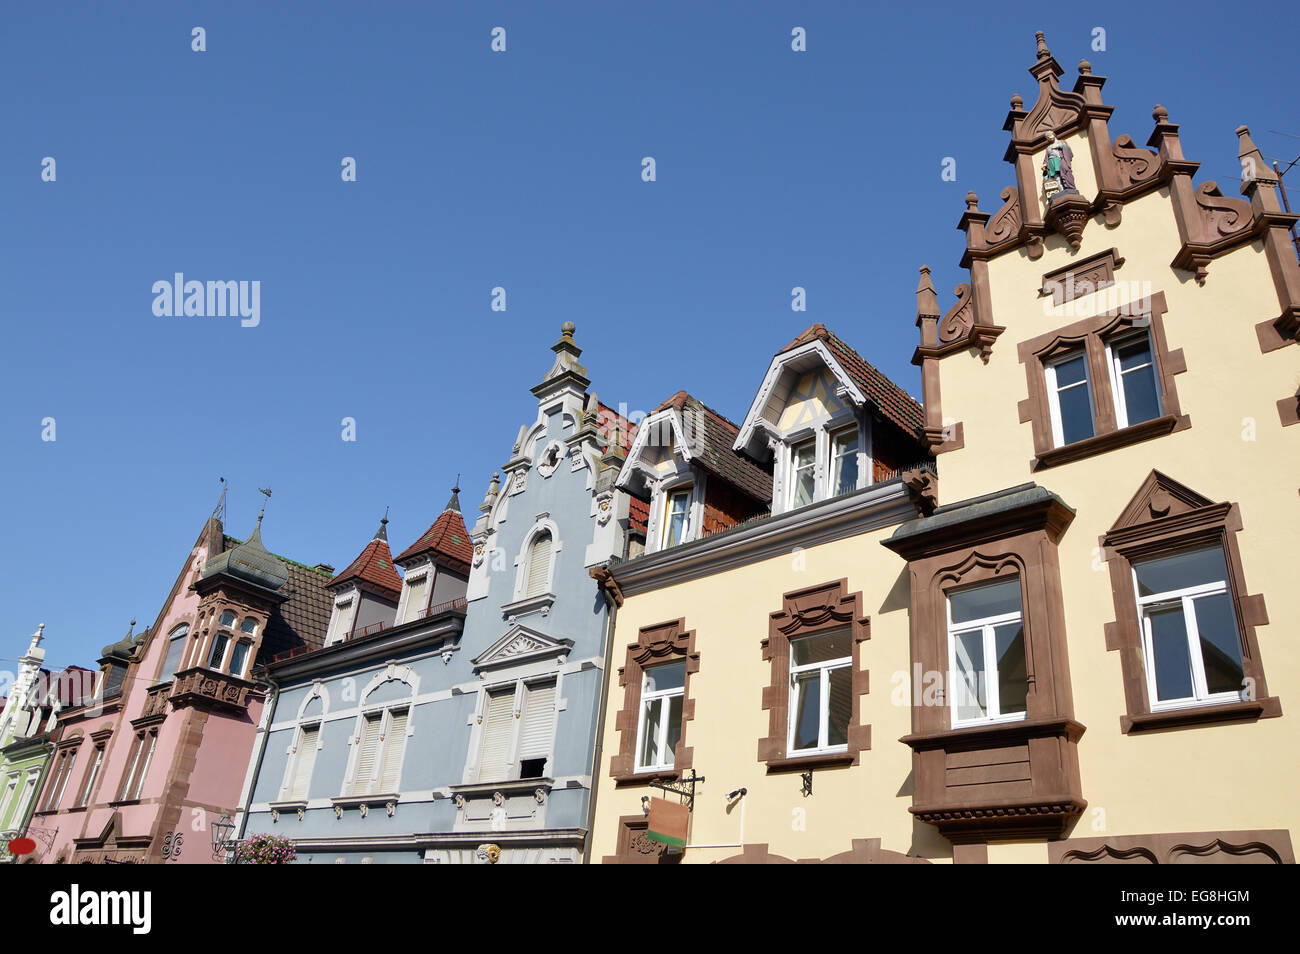 Facades, Painted in different colors, of buildings in Zell am Harmersbach a small historic city in Baden-Wurttemberg, Germany Stock Photo